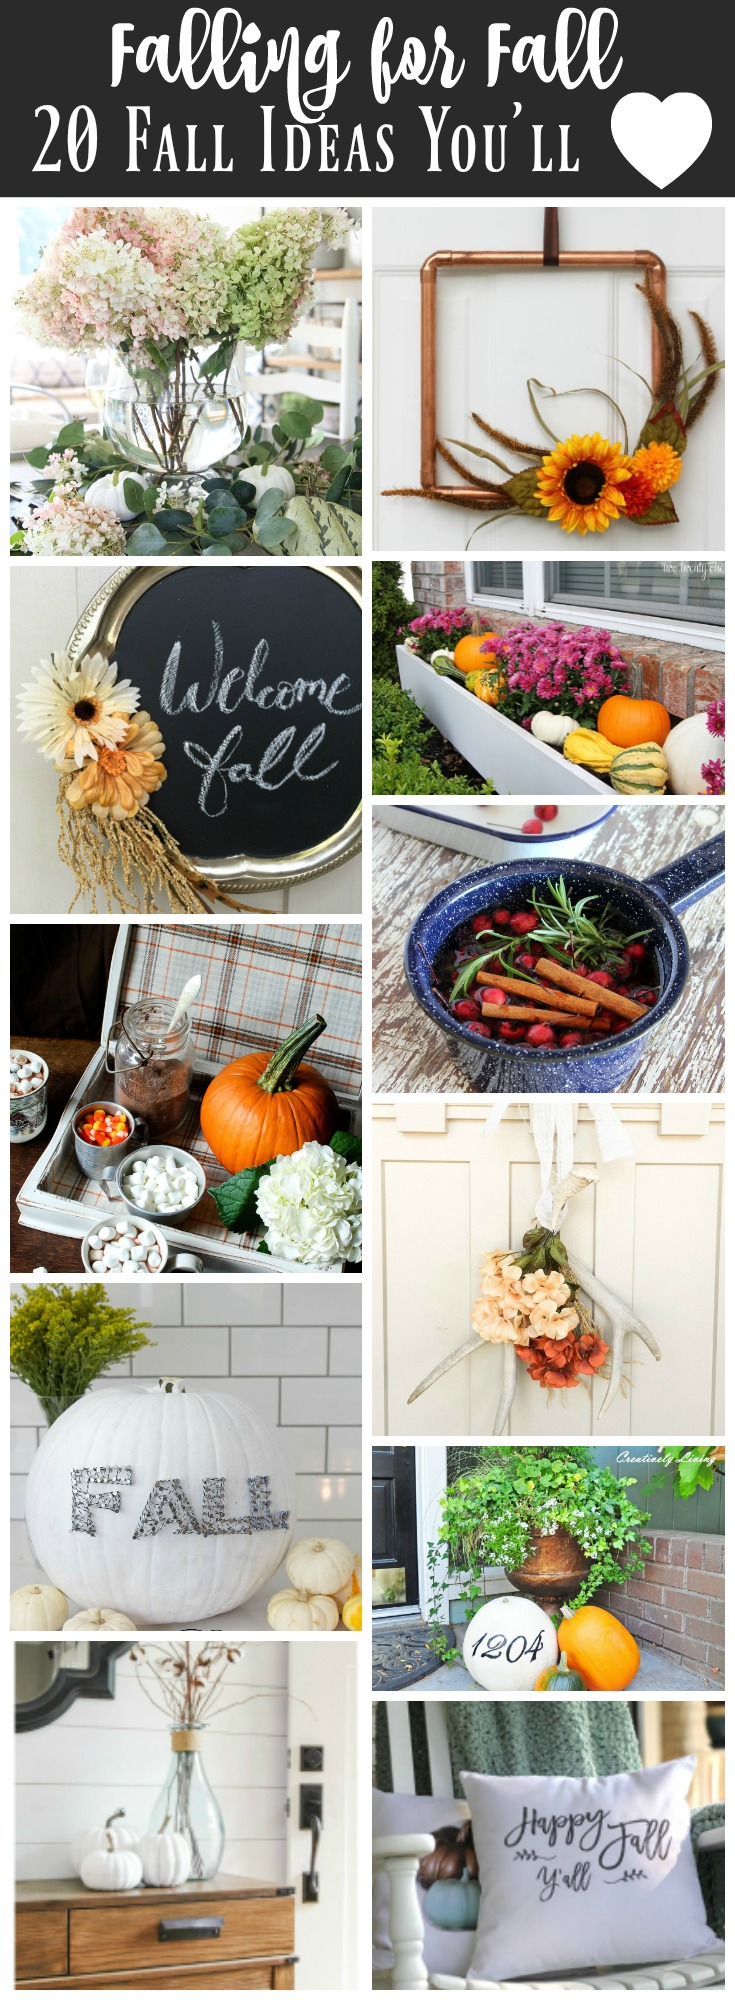 falling-for-fall-20-fantastic-fall-ideas-that-youll-love